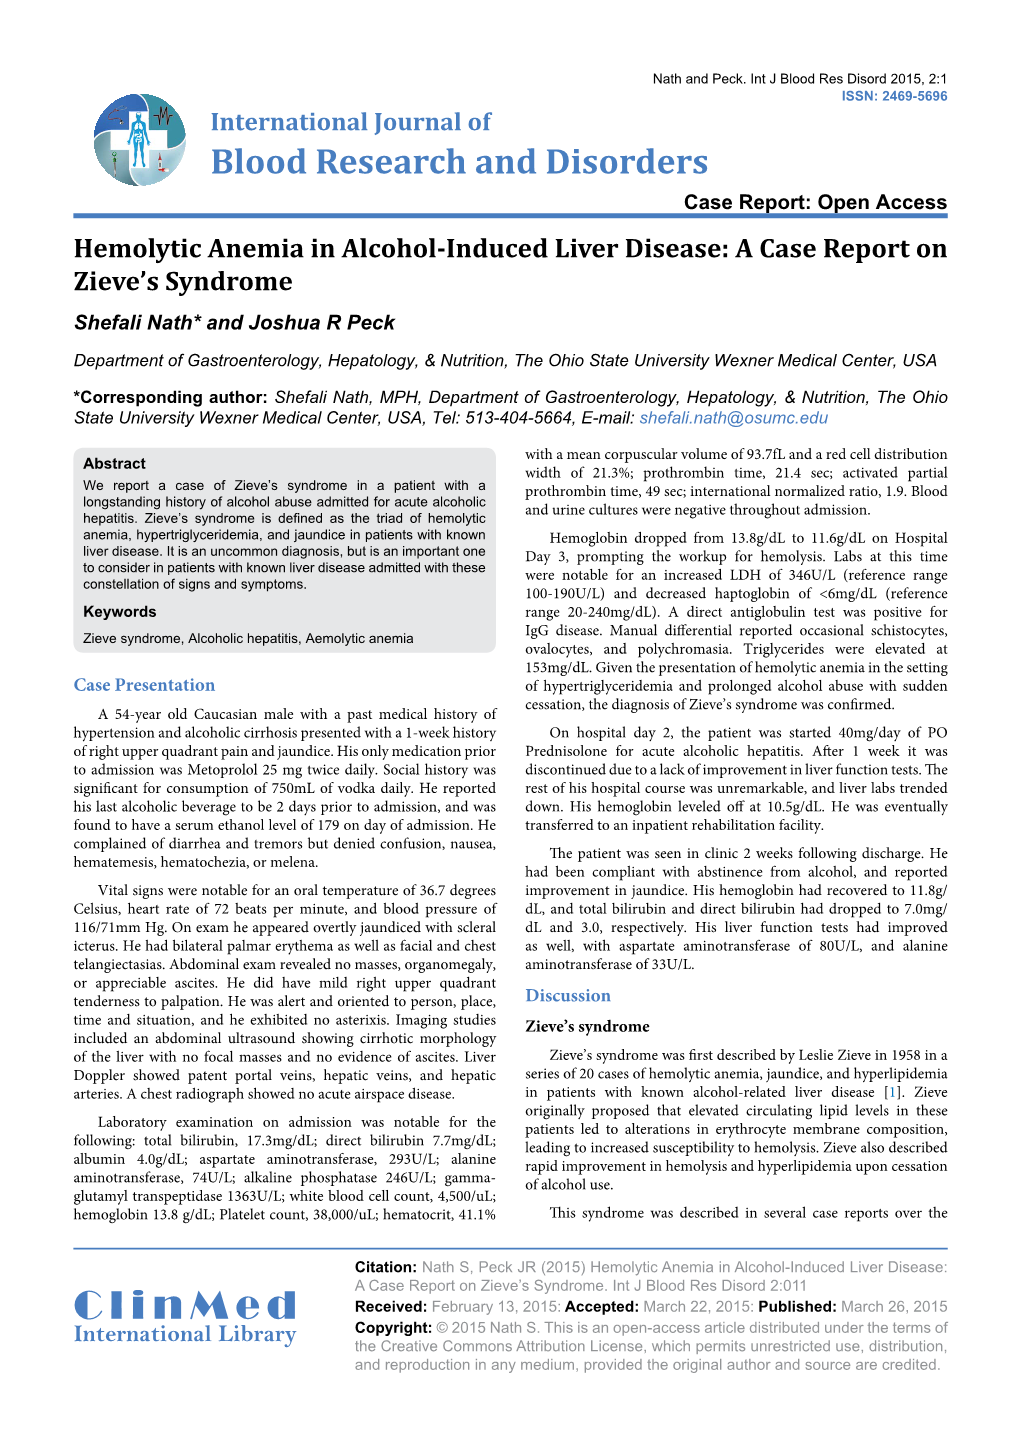 Hemolytic Anemia in Alcohol-Induced Liver Disease: a Case Report on Zieve’S Syndrome Shefali Nath* and Joshua R Peck